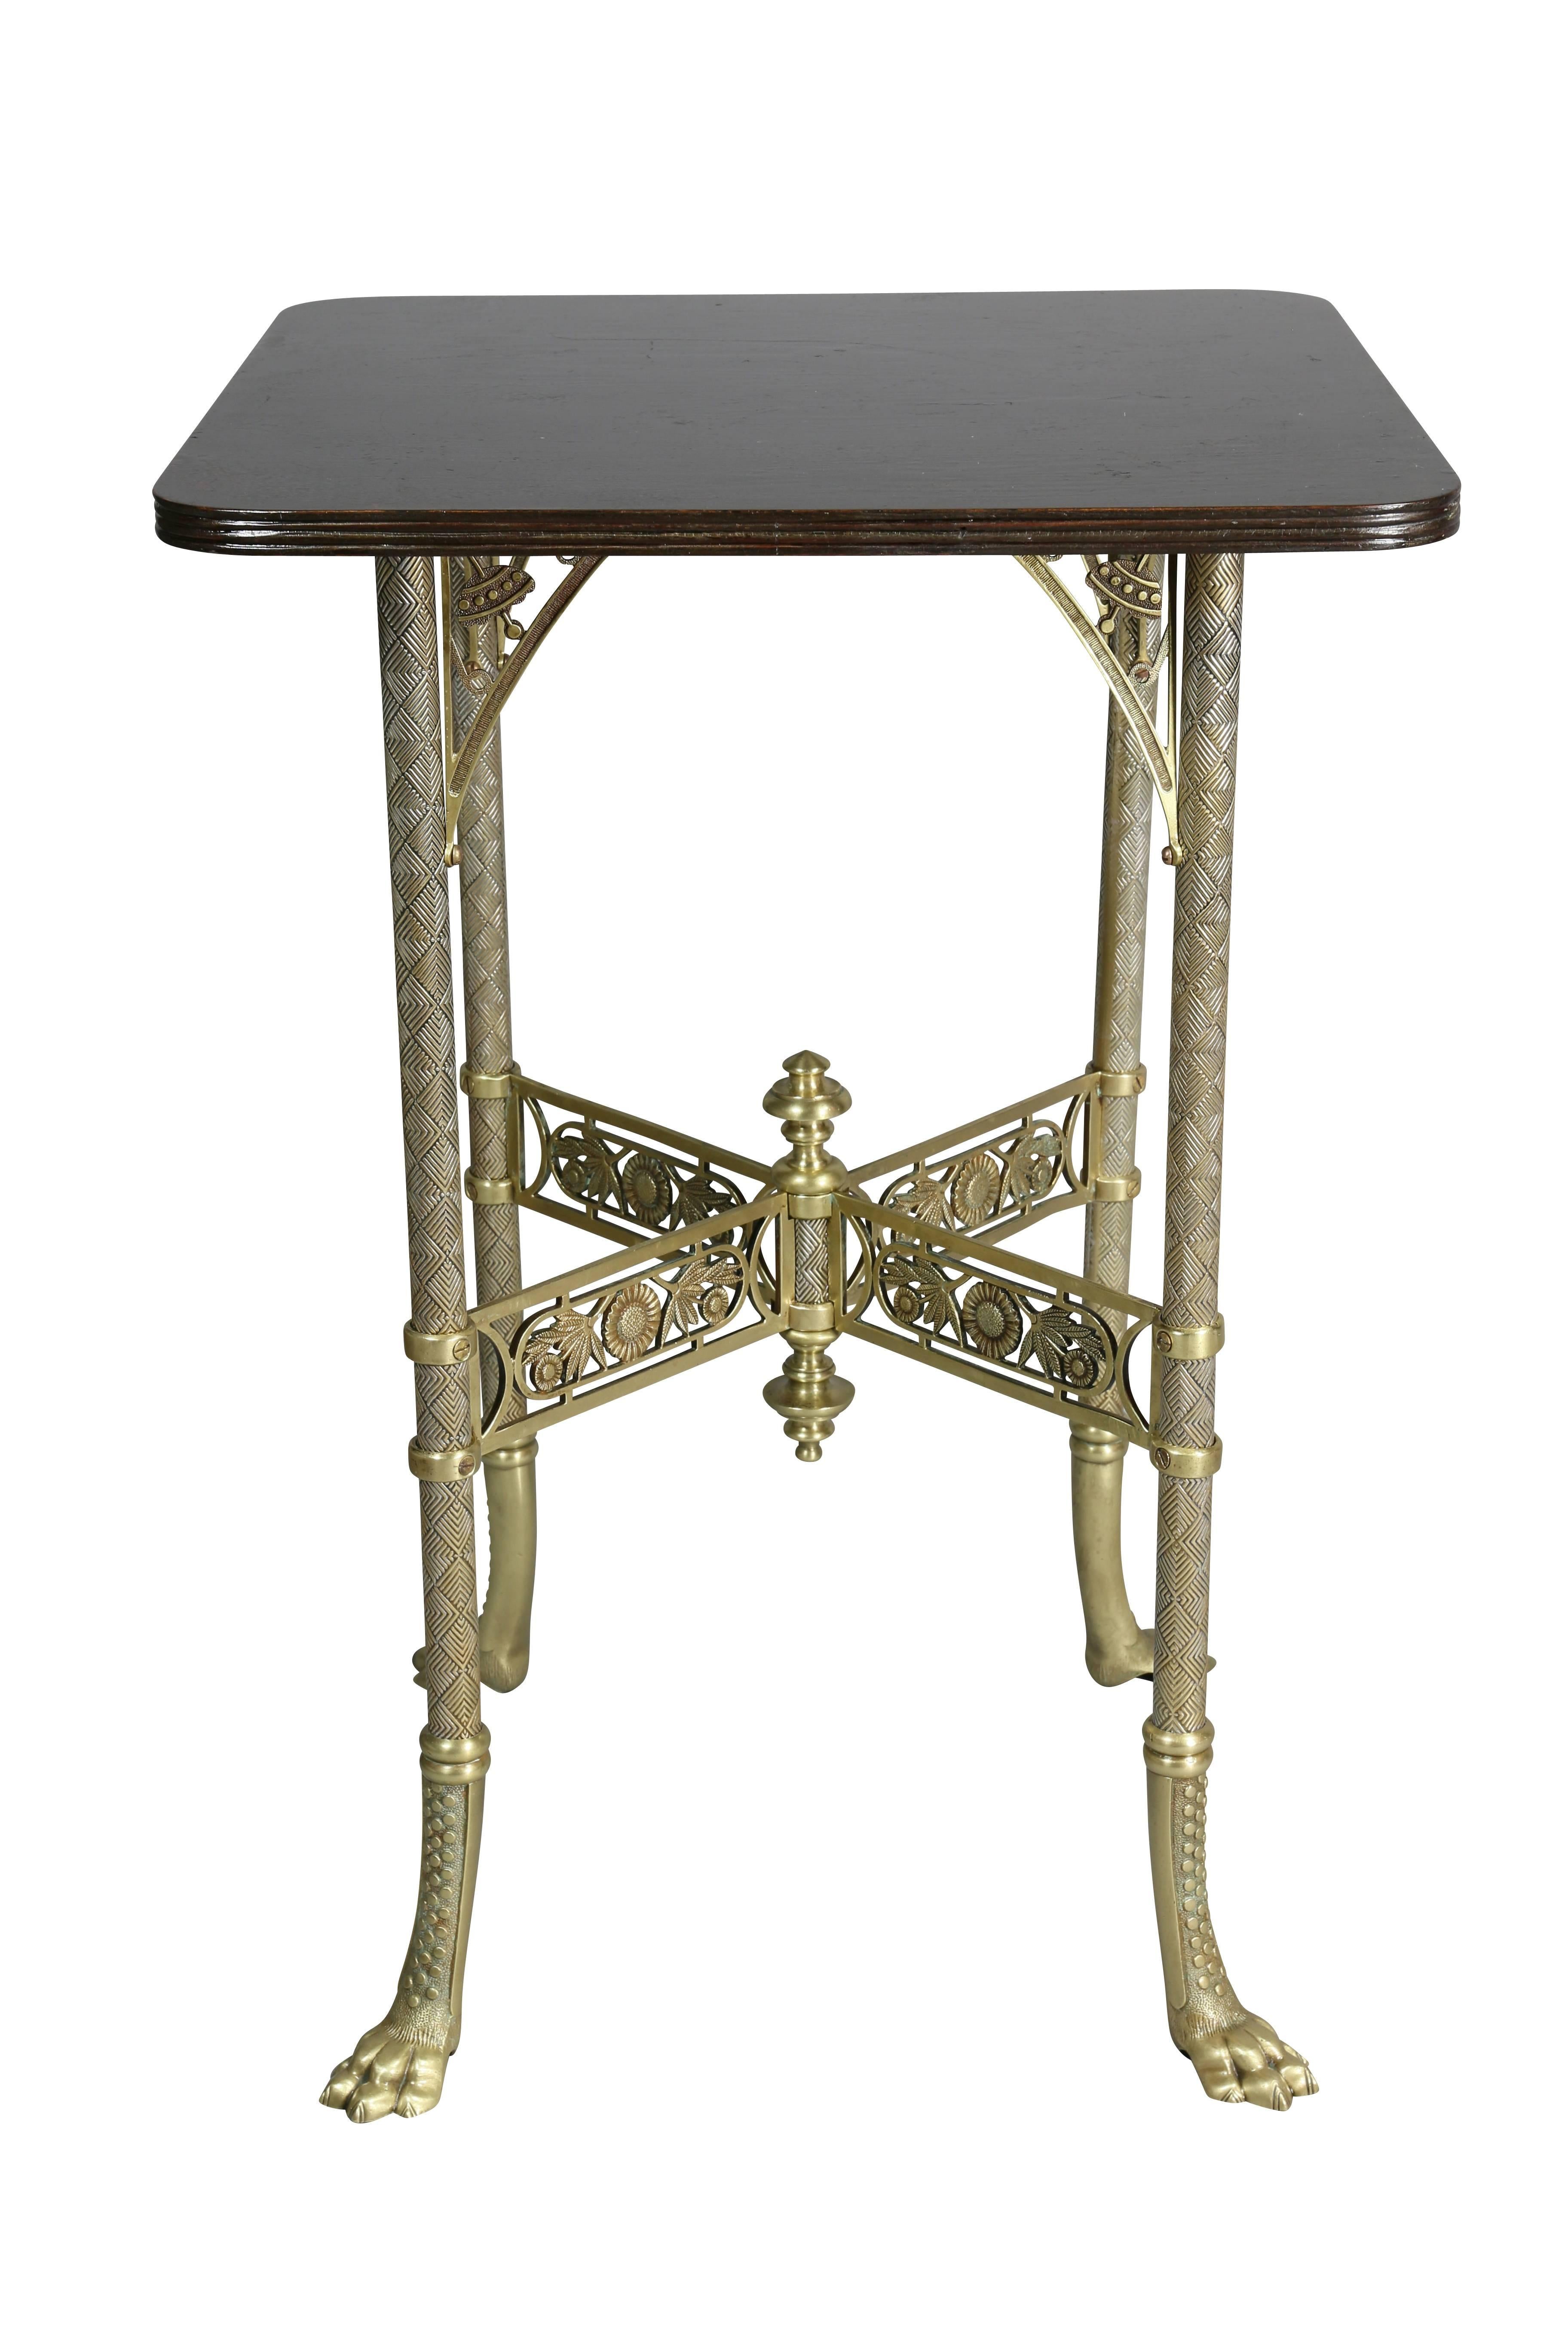 With square wood top with reeded edge over a base with spandrels with decoration in the form of a top, crosshatched tubular legs and X form stretcher with pierced decoration and chrysanthemums, paw feet.